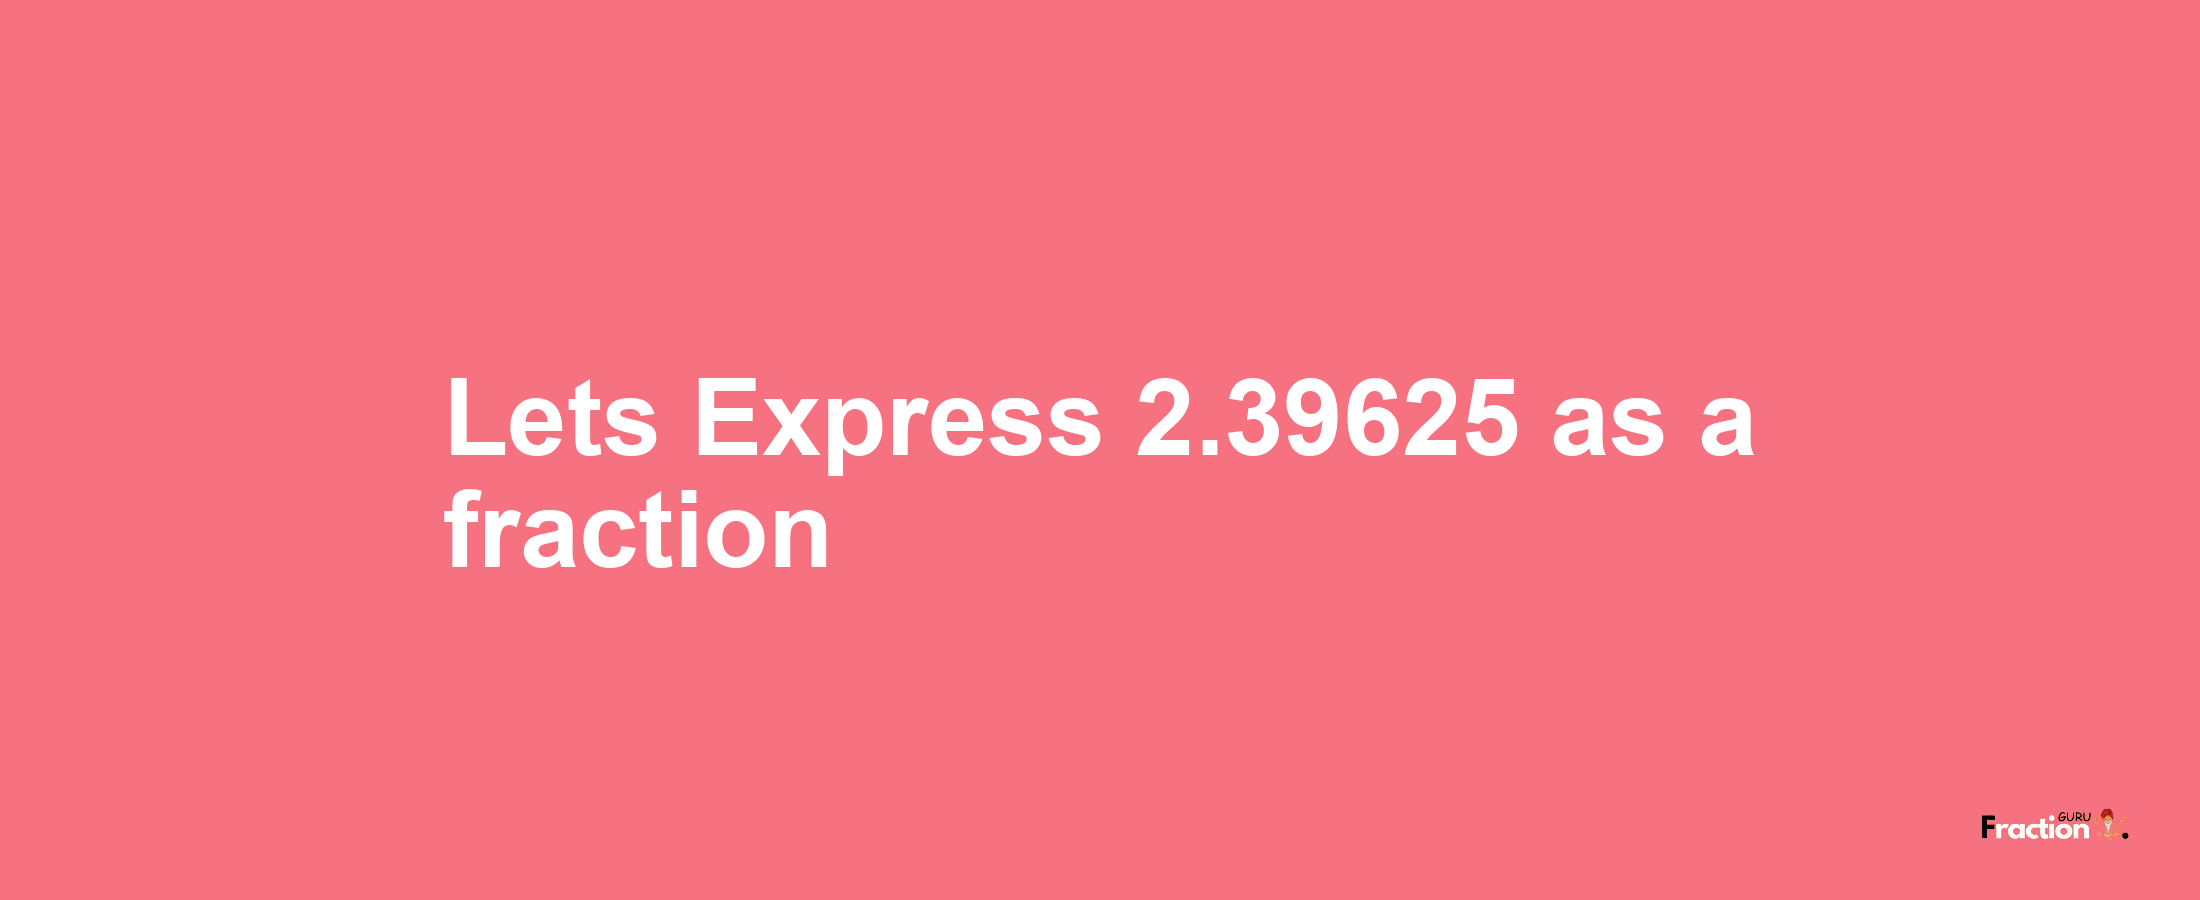 Lets Express 2.39625 as afraction